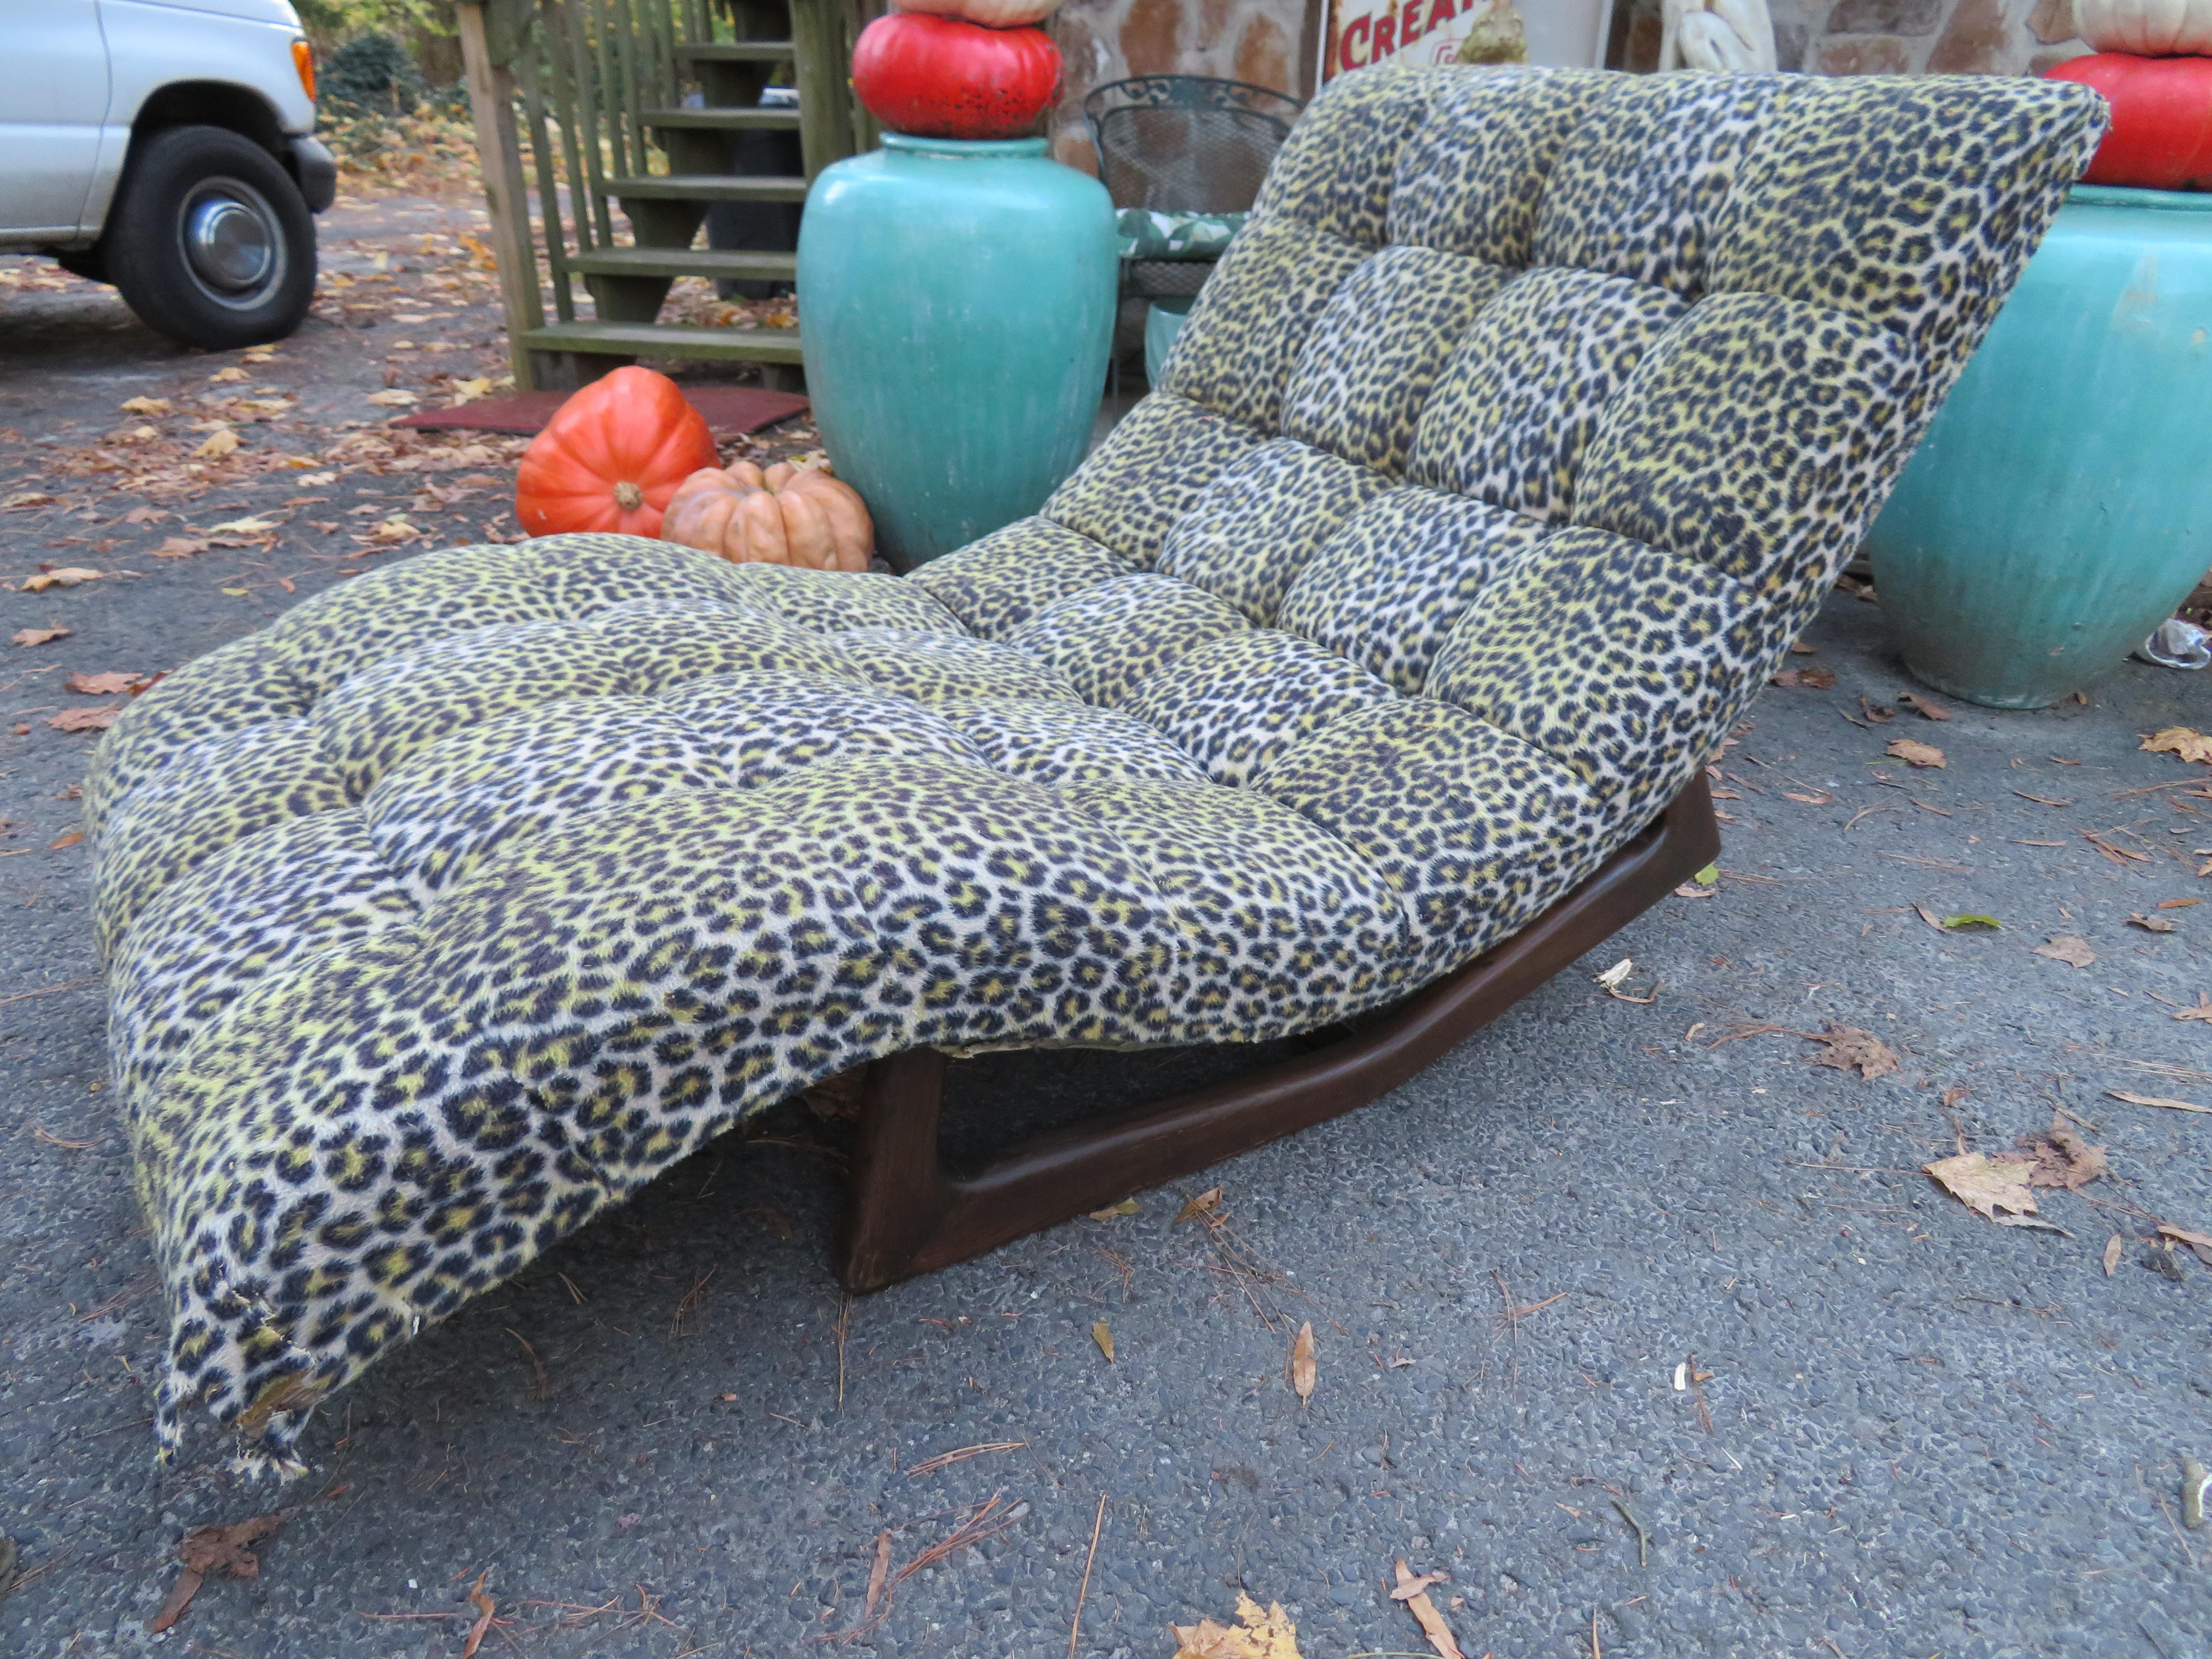 Wonderful Adrian Pearsall sculptural walnut wave chaise lounge chair. Of-course this will need to be re-upholstered but the bones are great. This particular style of rocker walnut base allow you to lay back and move to upright position without